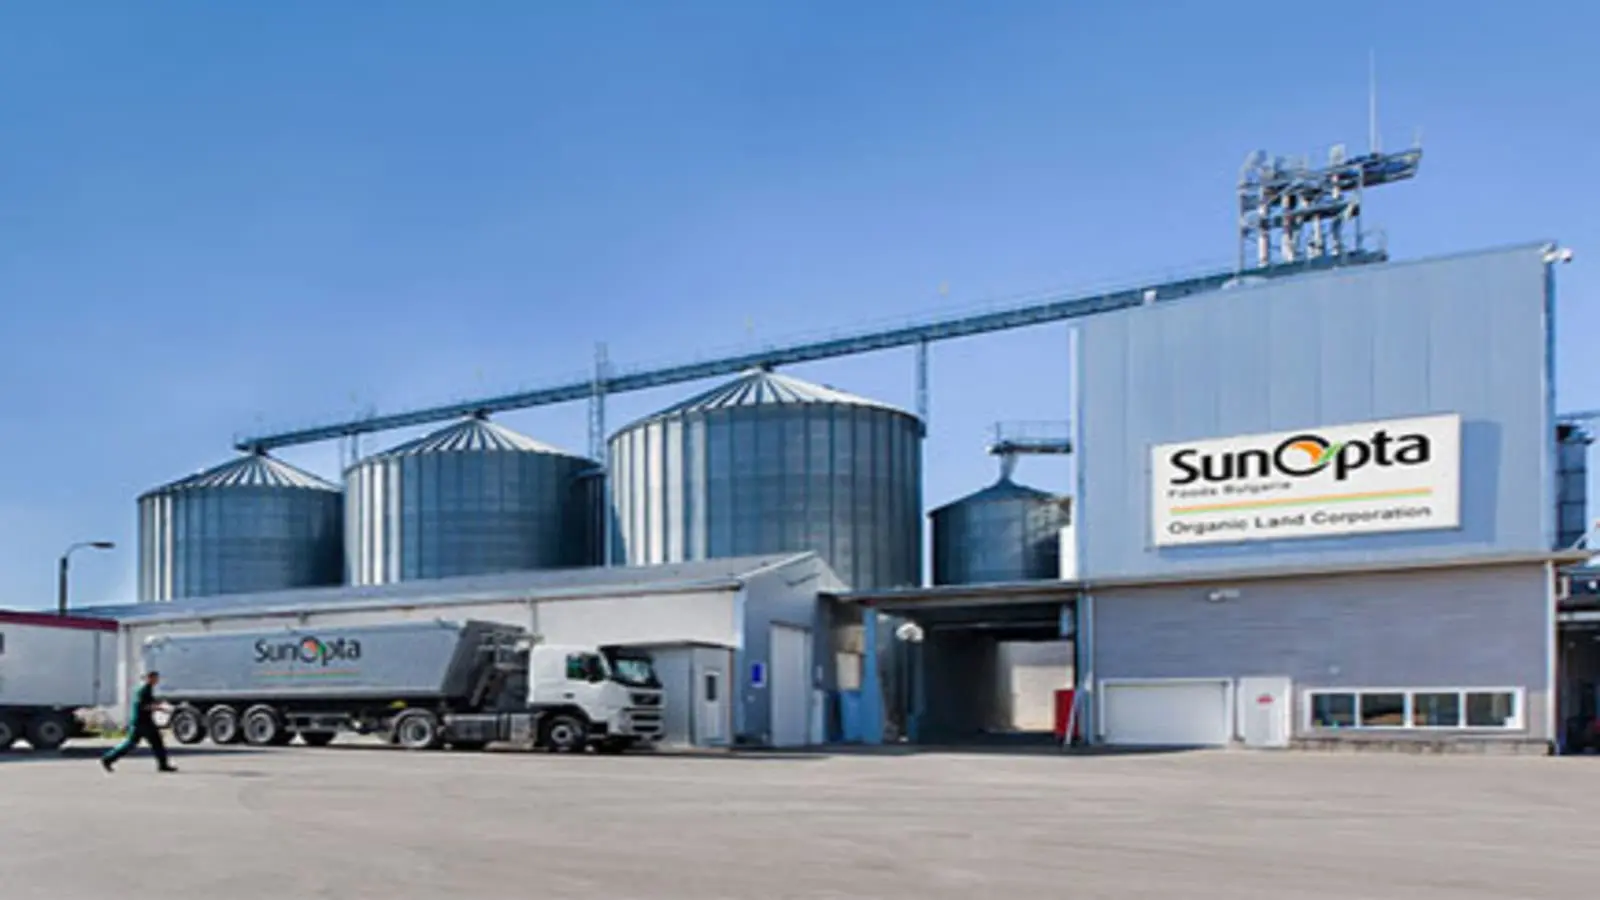 SunOpta to launch completed first phase of US$100m sterile alternative milk plant